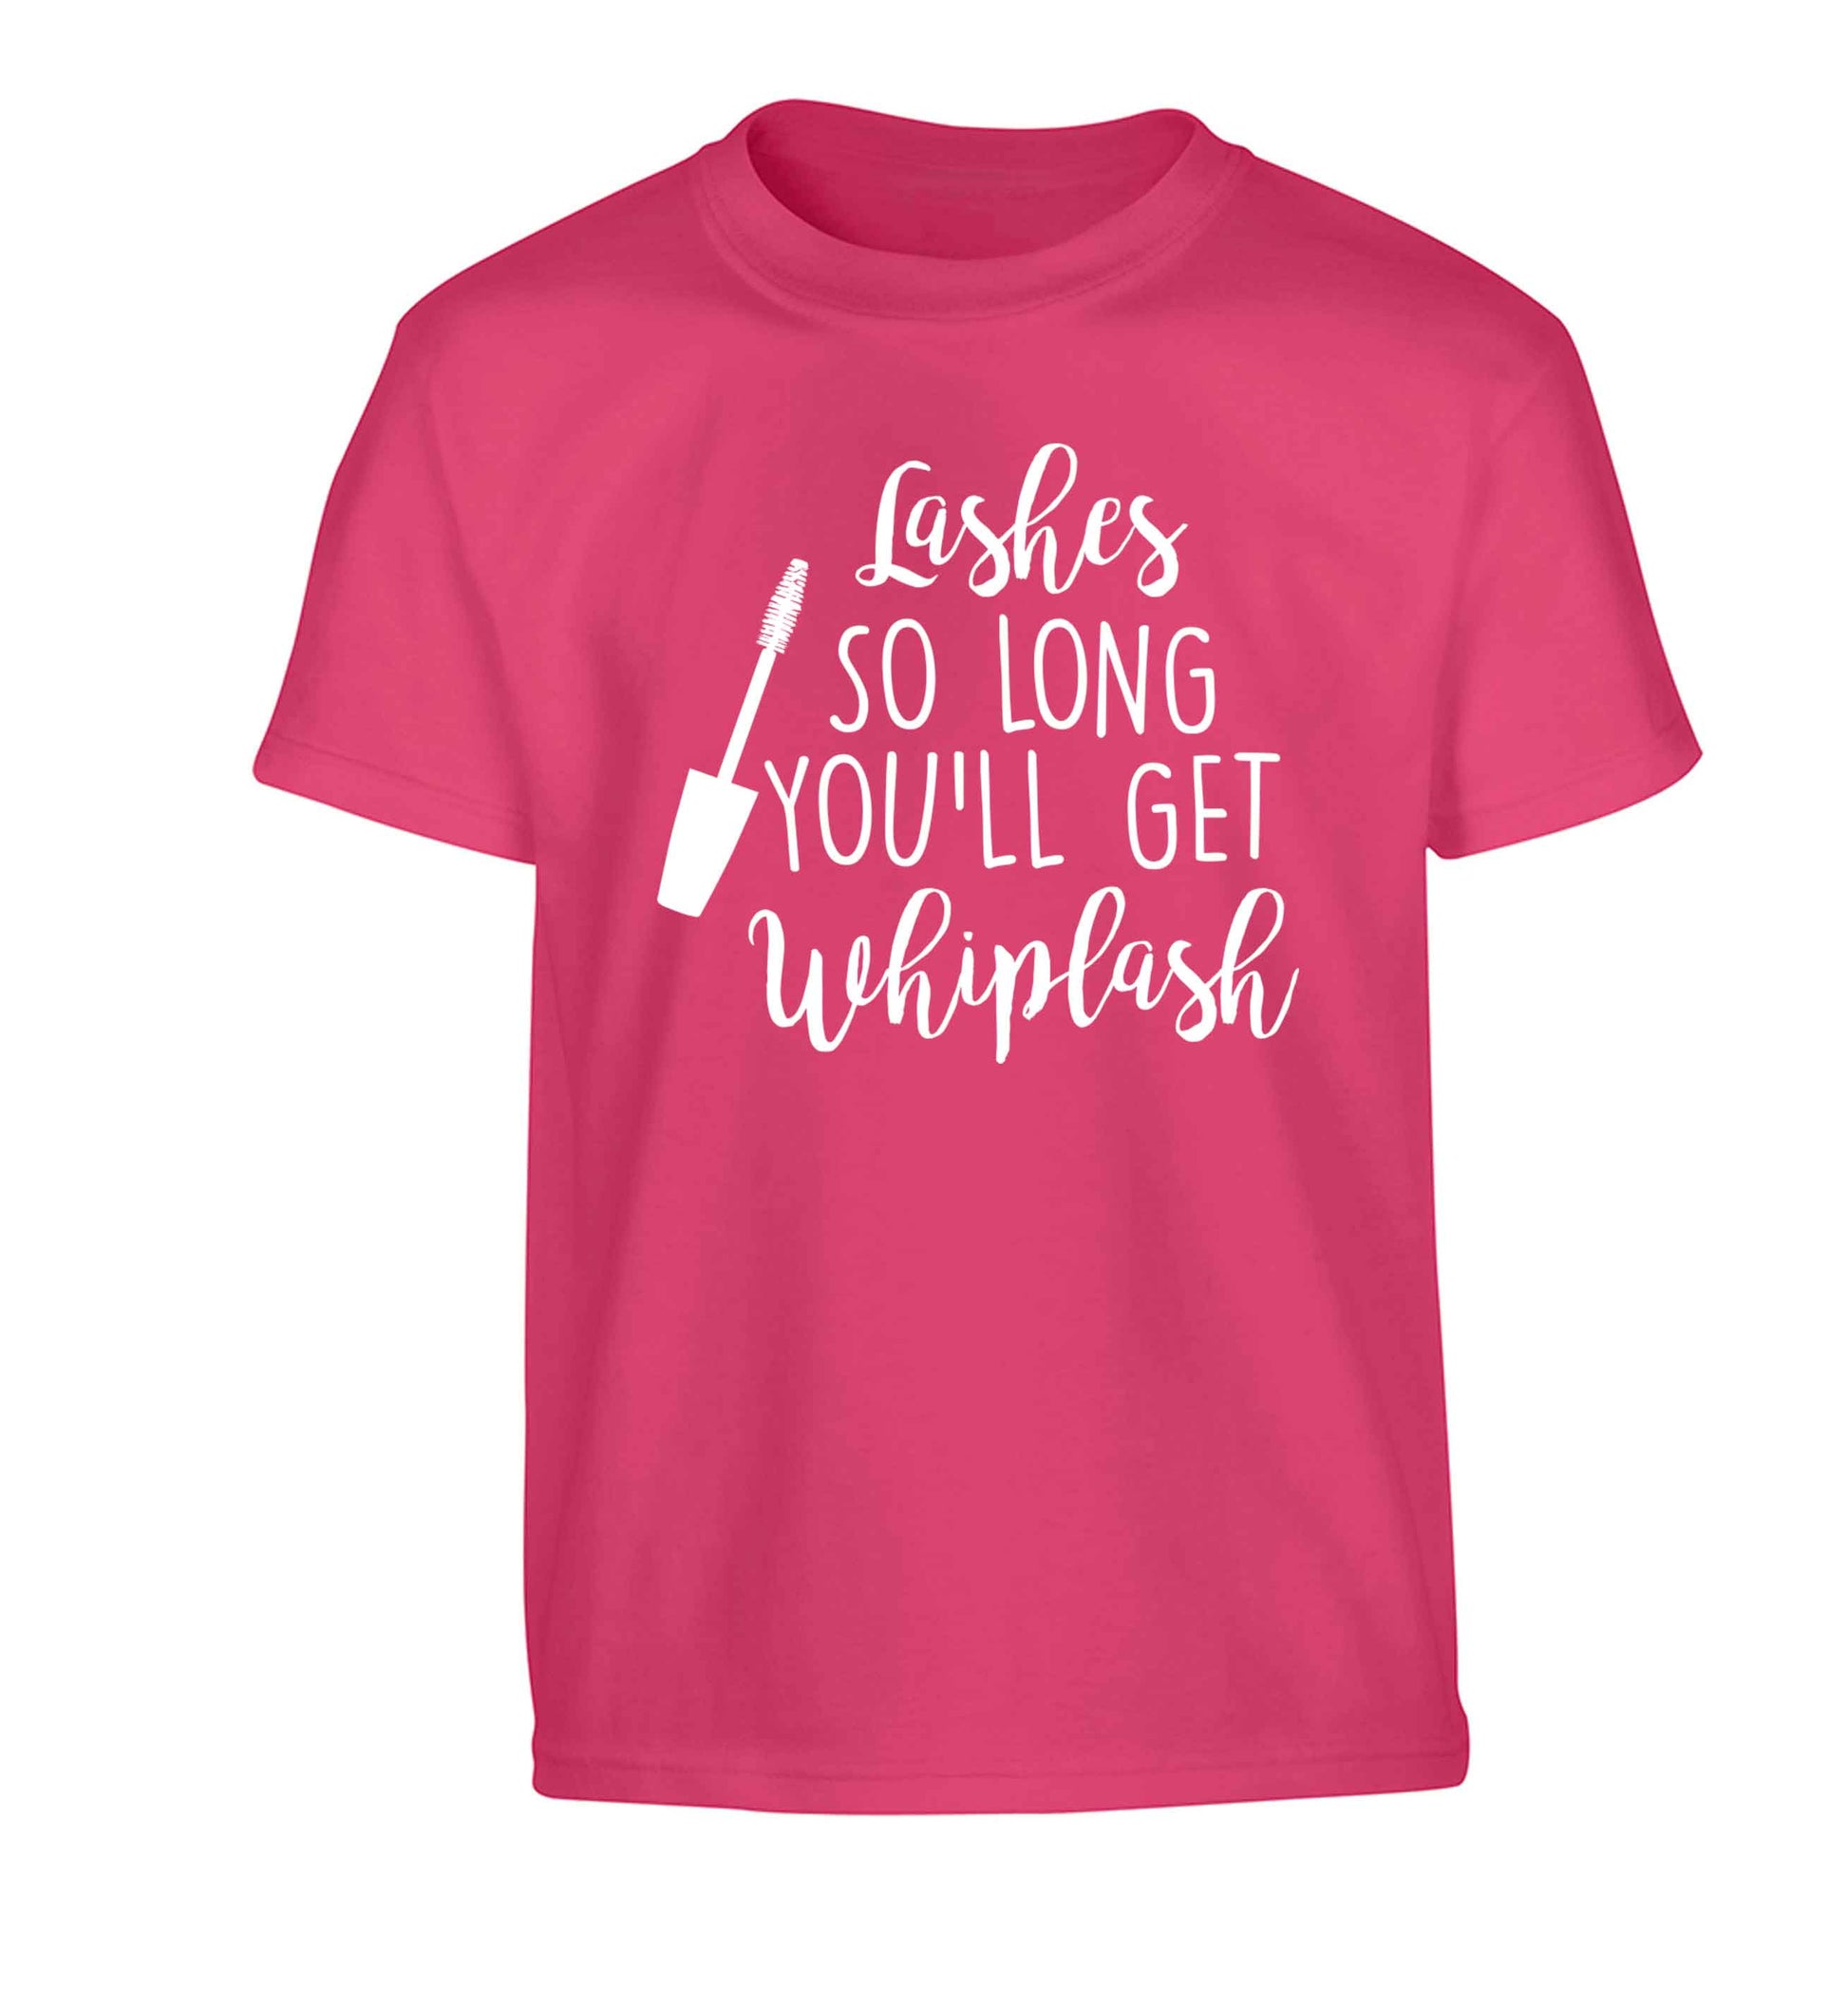 Lashes so long you'll get whiplash Children's pink Tshirt 12-13 Years